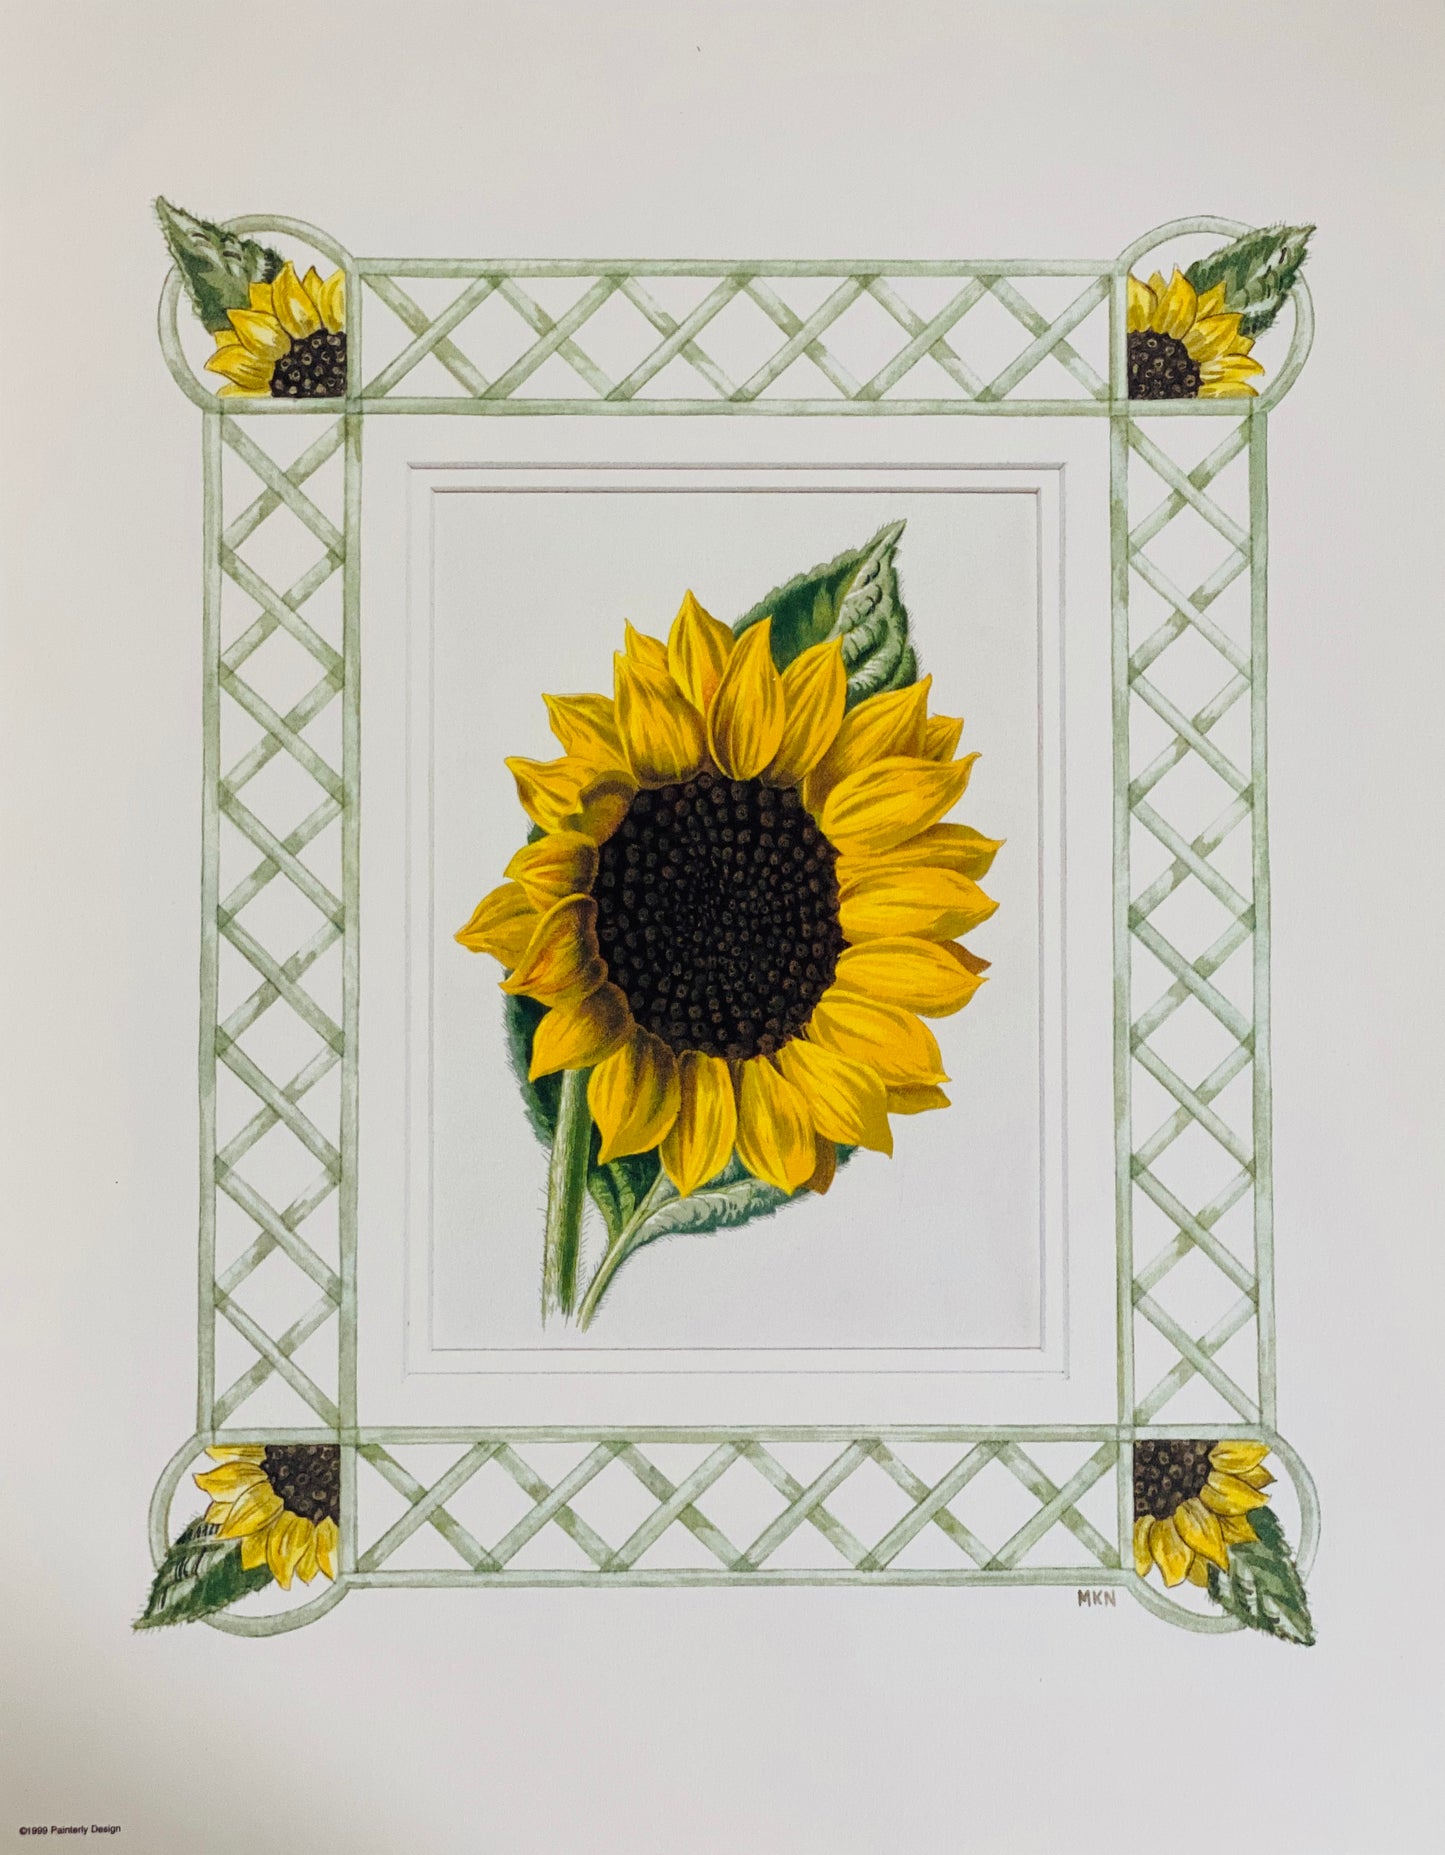 Sunflower antique print with hand-painted border